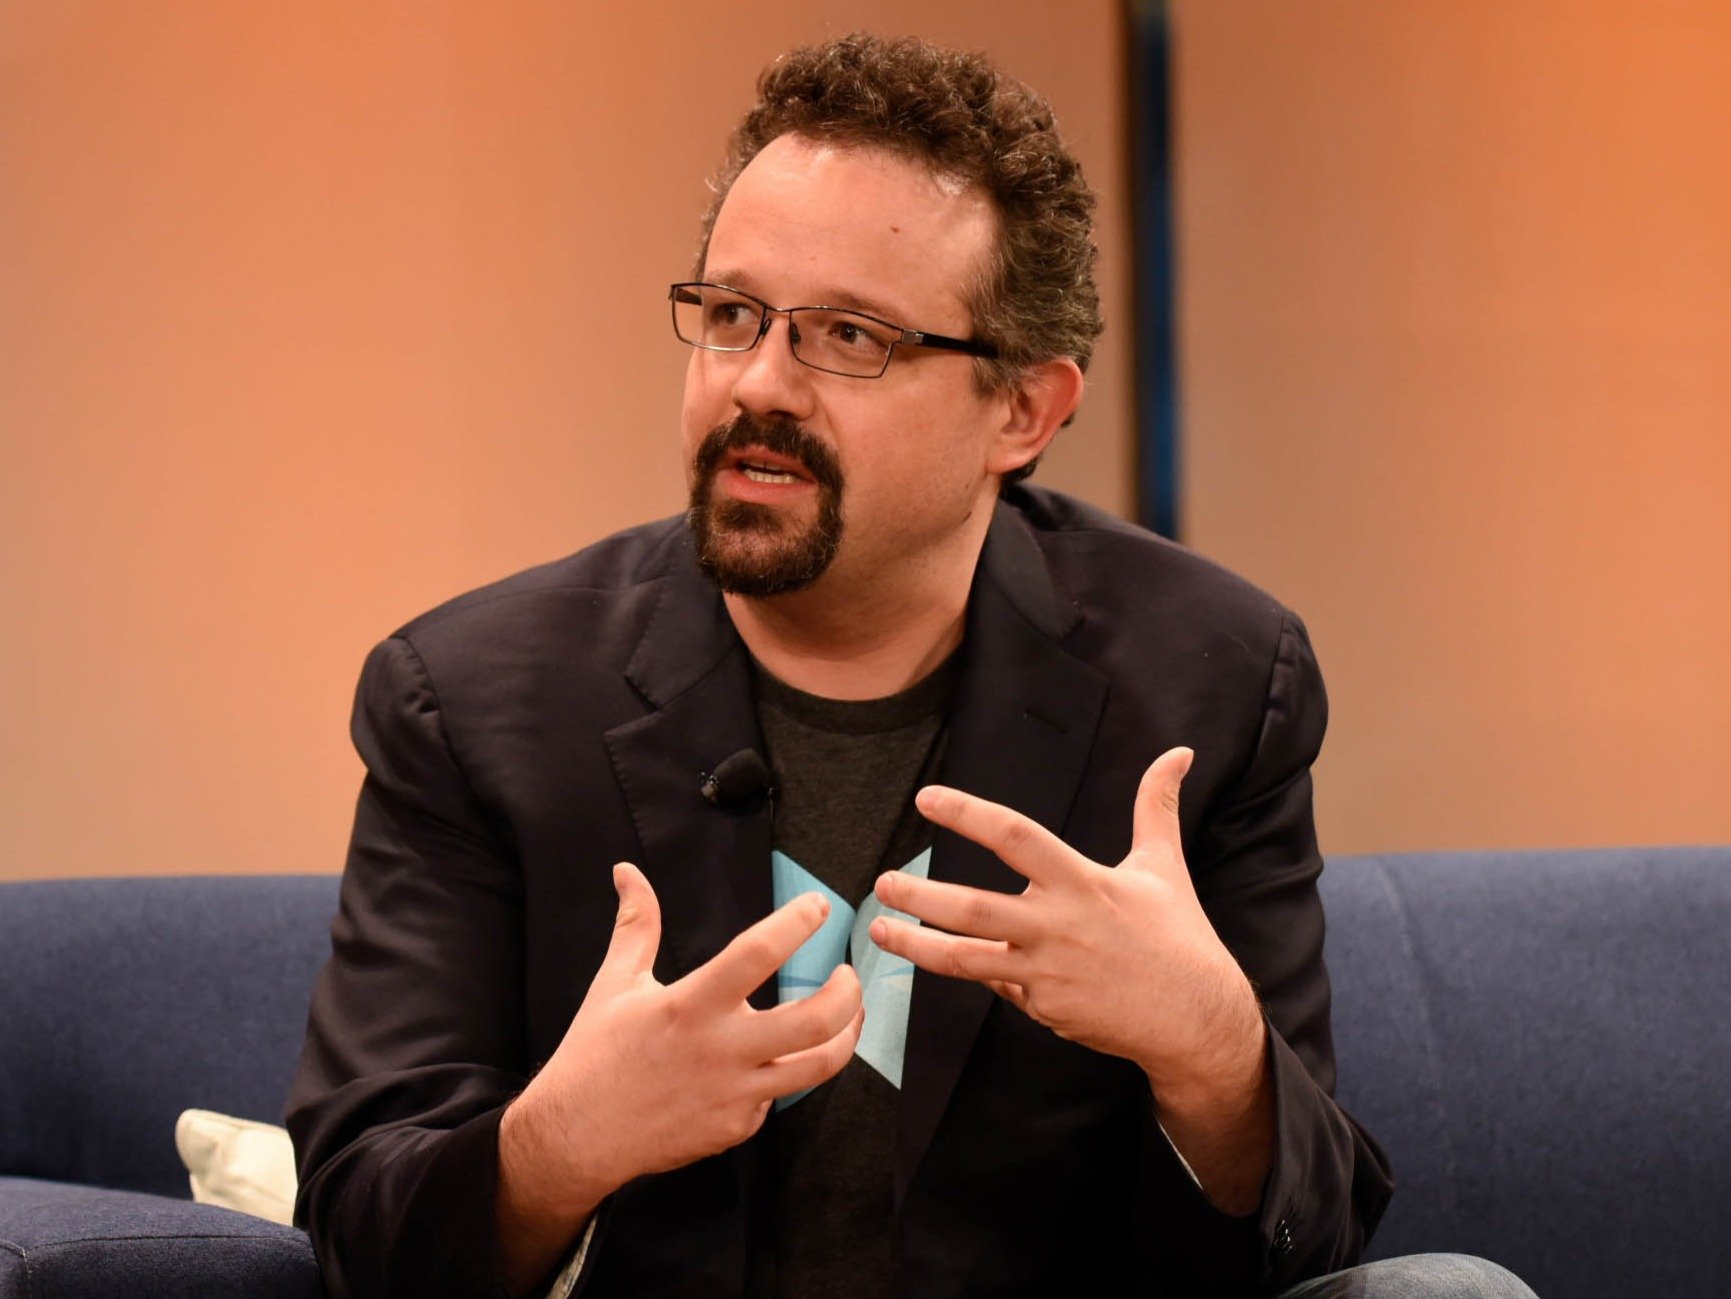 The cofounder of Evernote shares the best advice he’s ever received as a CEO